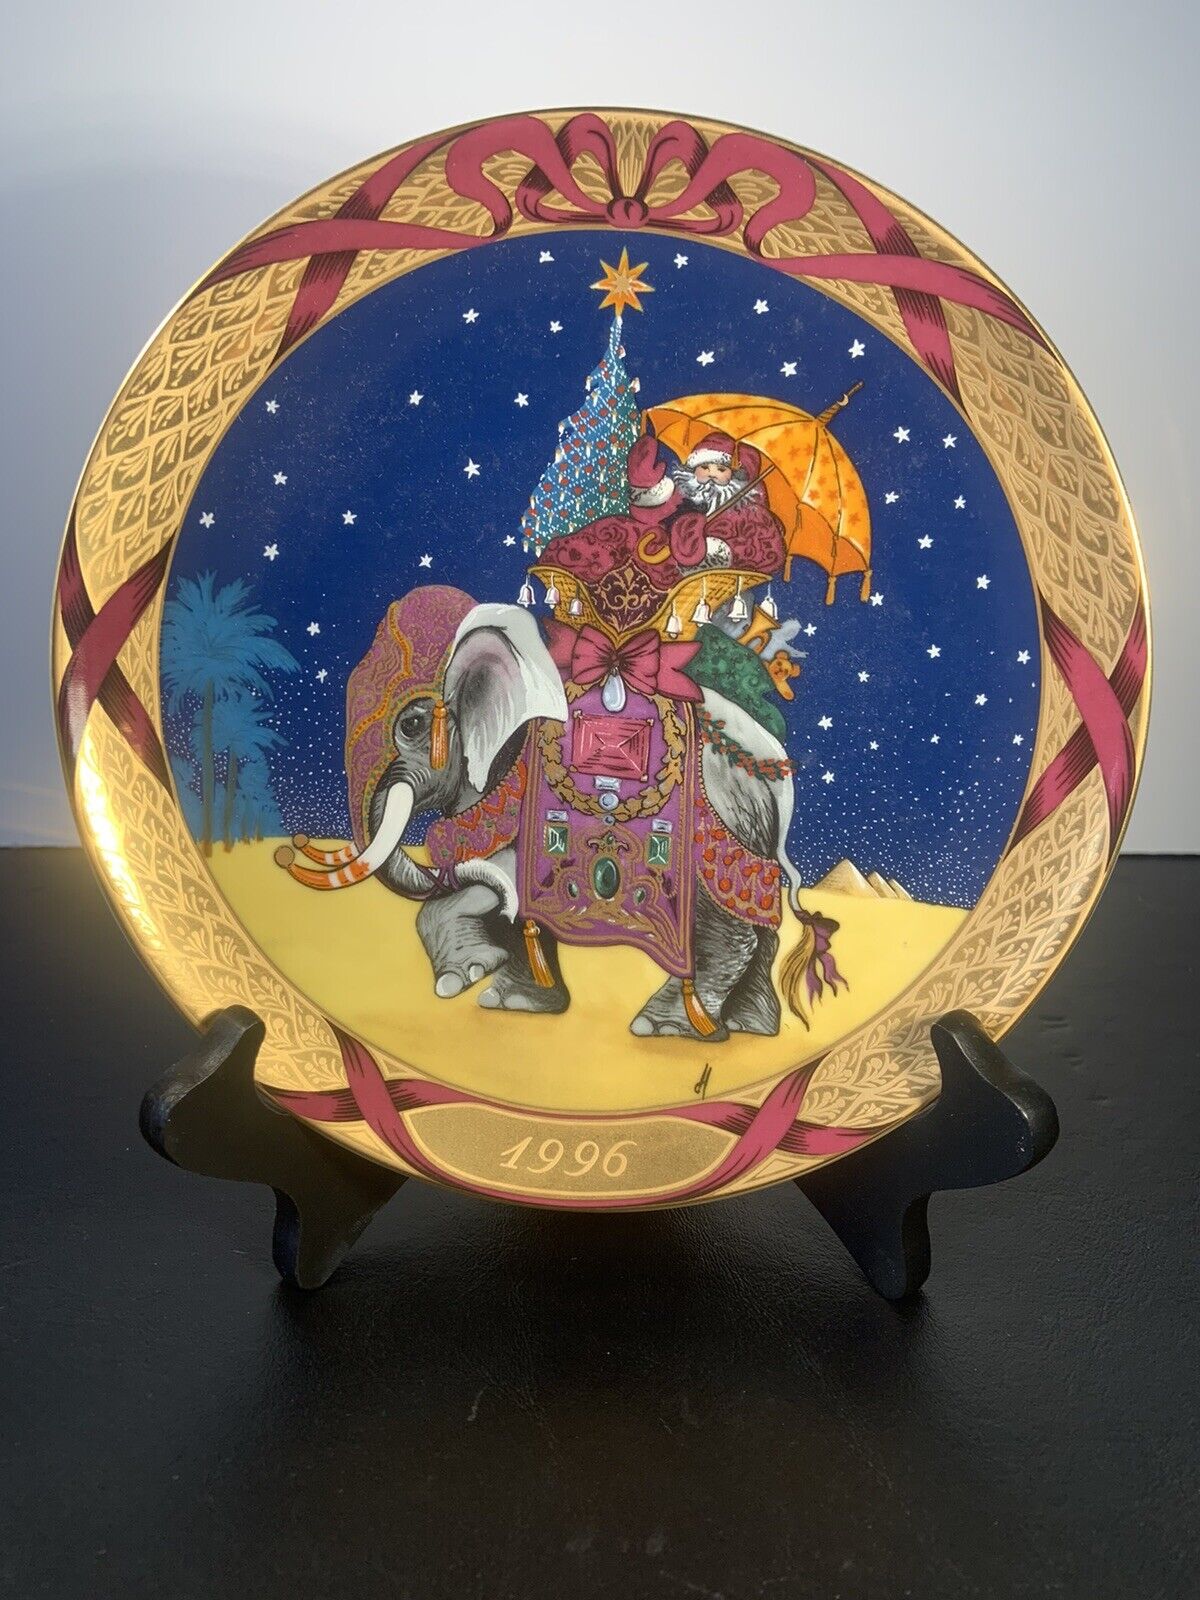 Bing & Grondahl 1996 “Santa Claus In The Orient” Christmas Porcelain Plate 8”